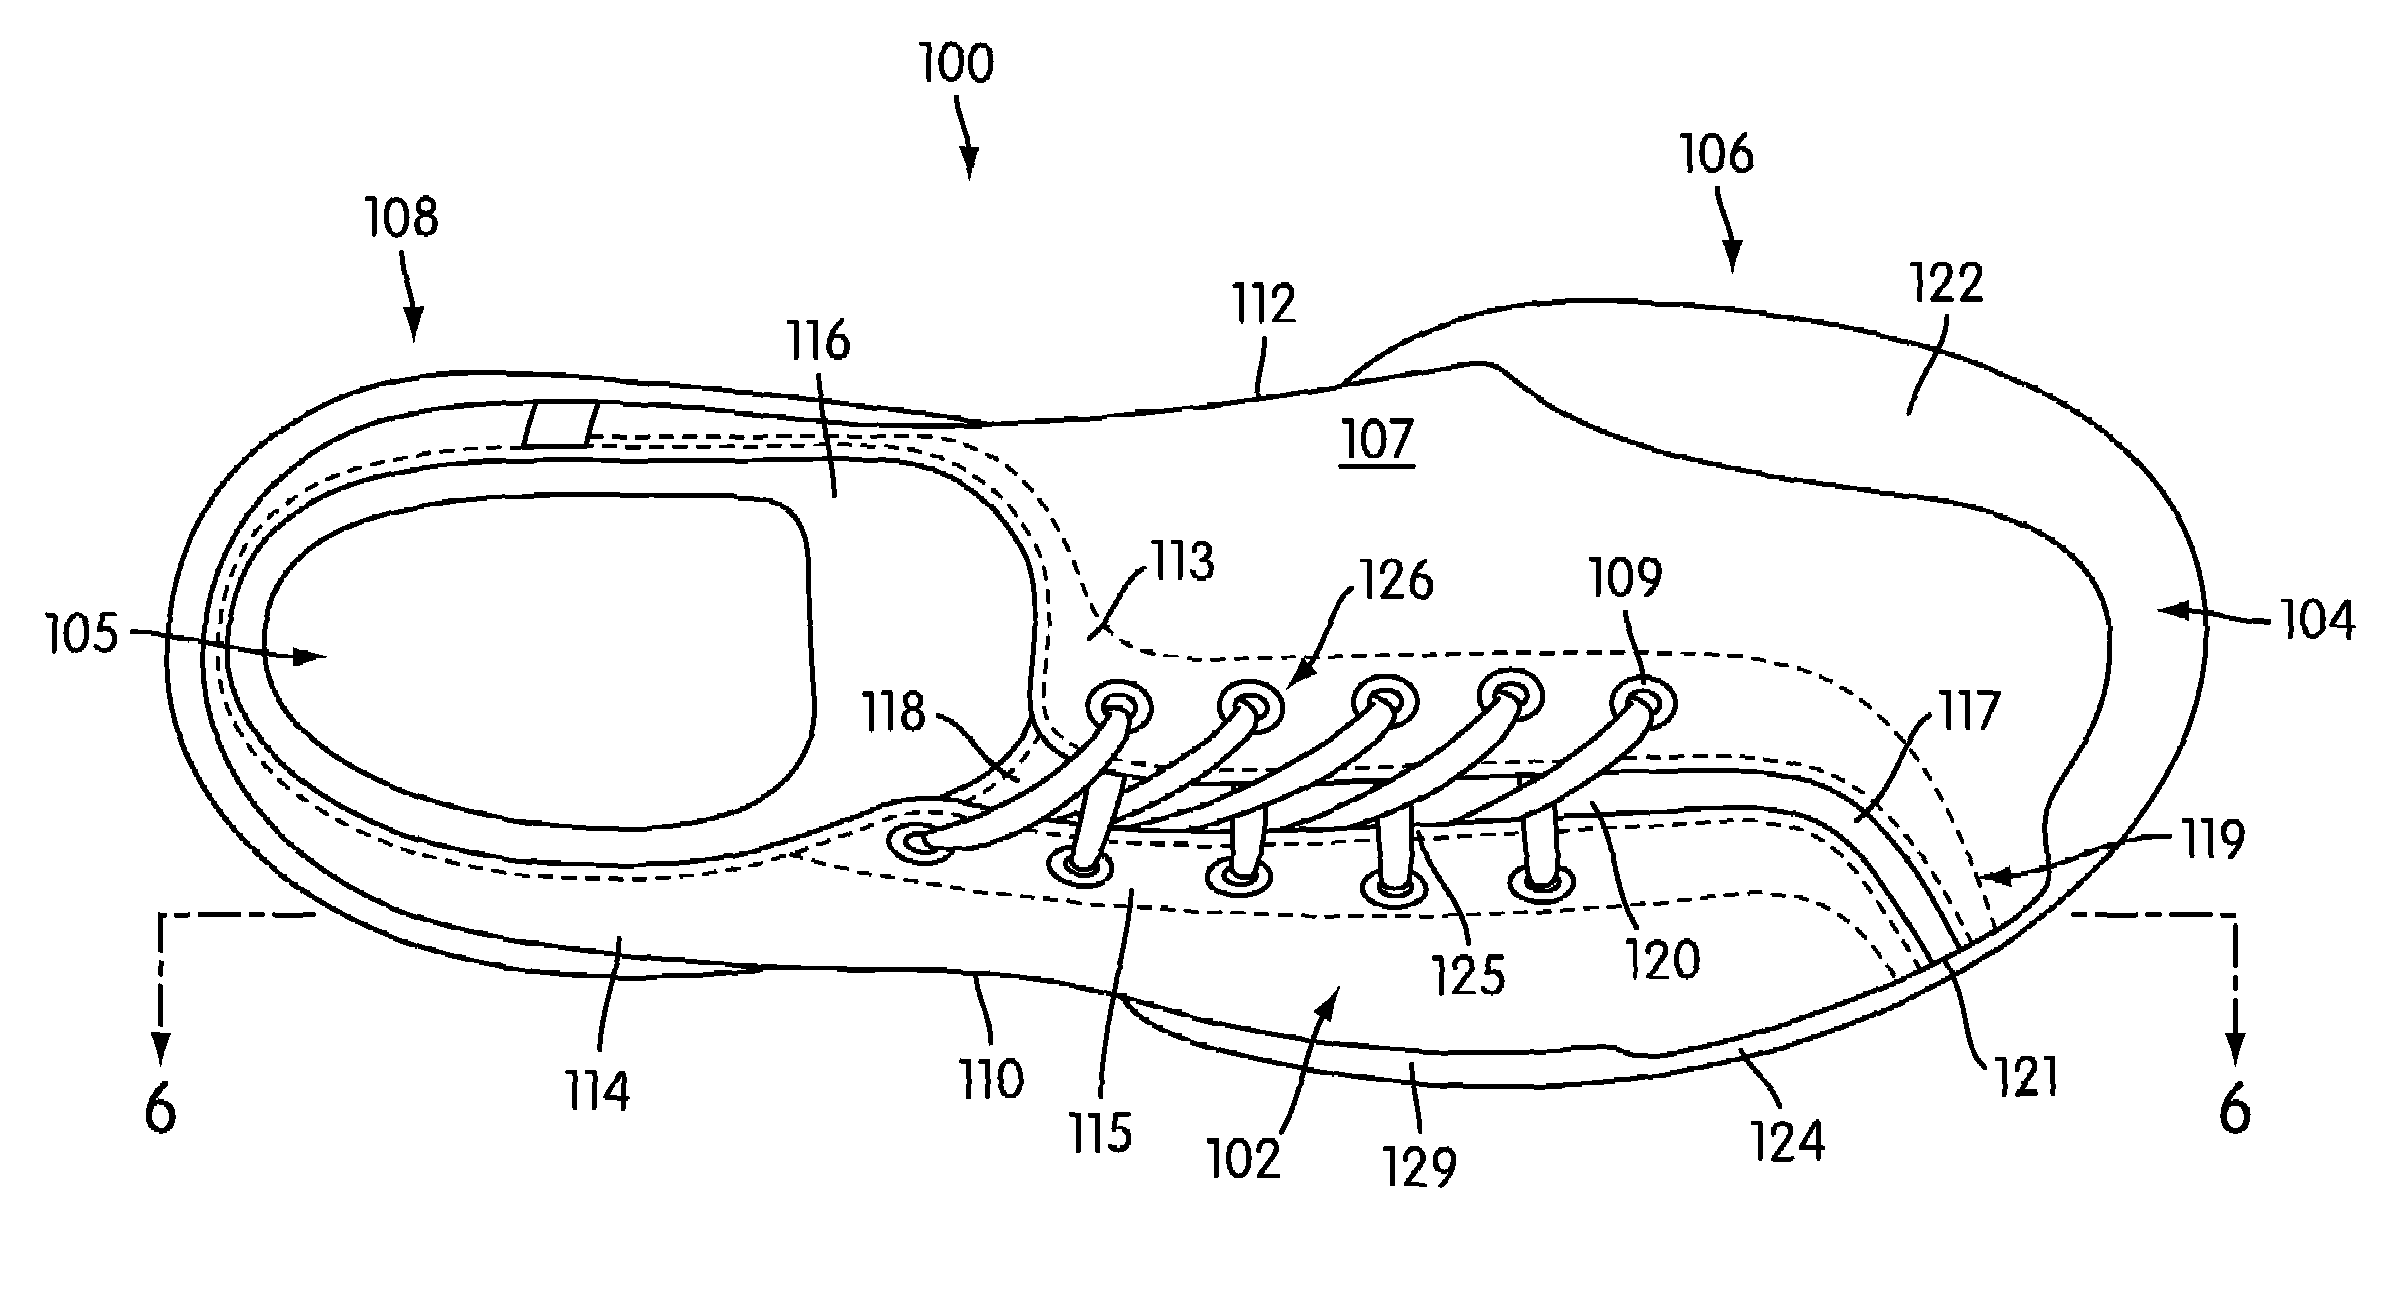 Article of footwear for fencing